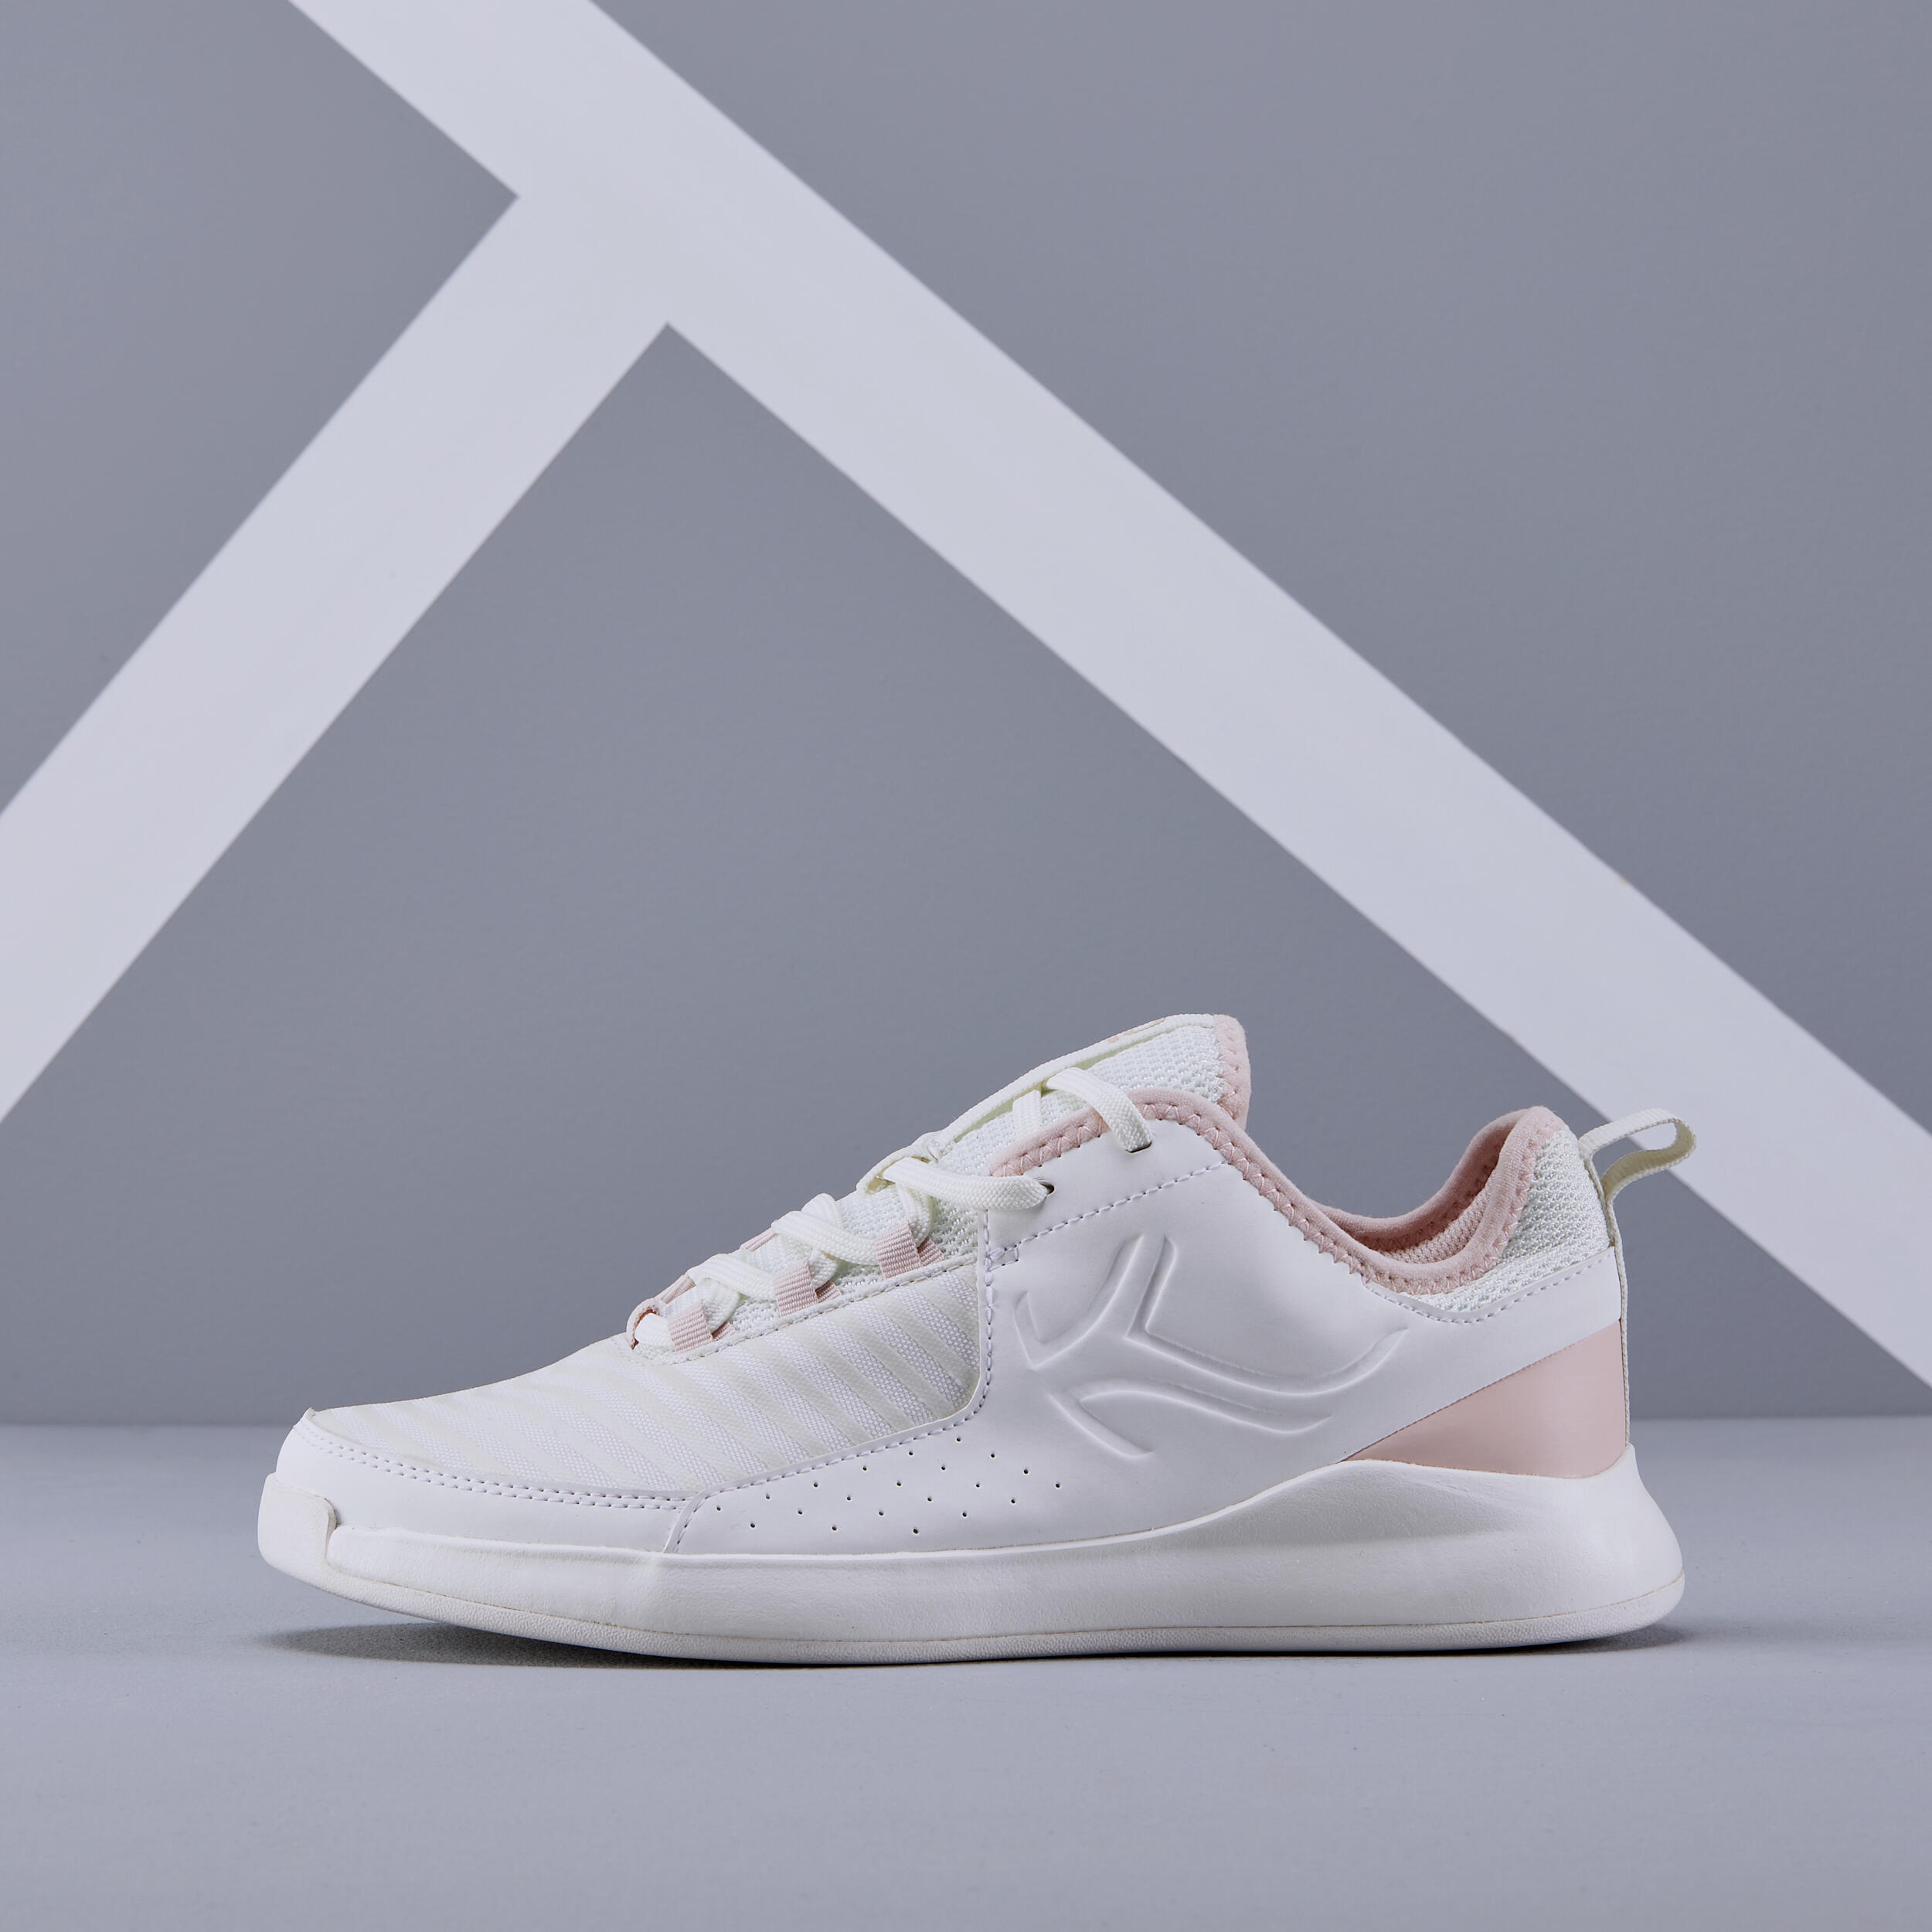 Women's Tennis Shoes TS 130 - Off-White/Pink 3/6